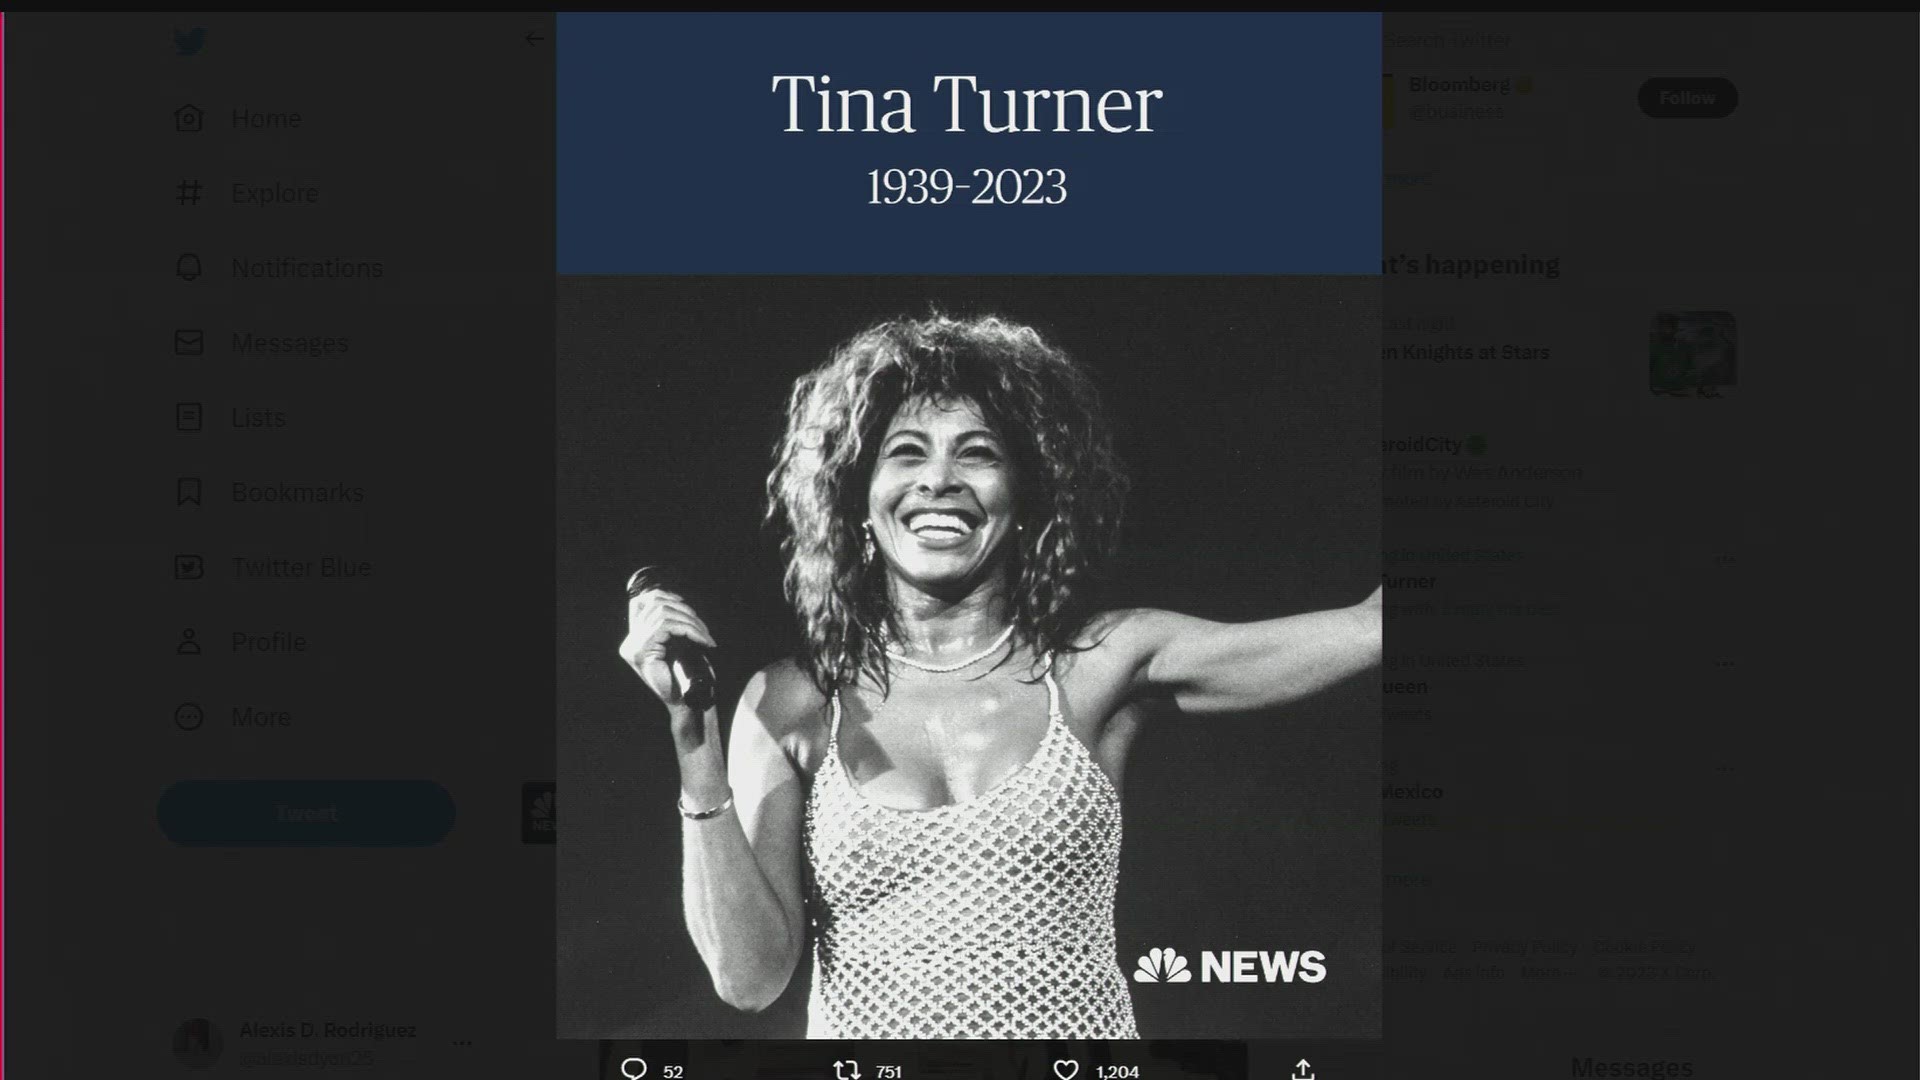 Music legend Tina Turner has died at the age of 83 following a long illness